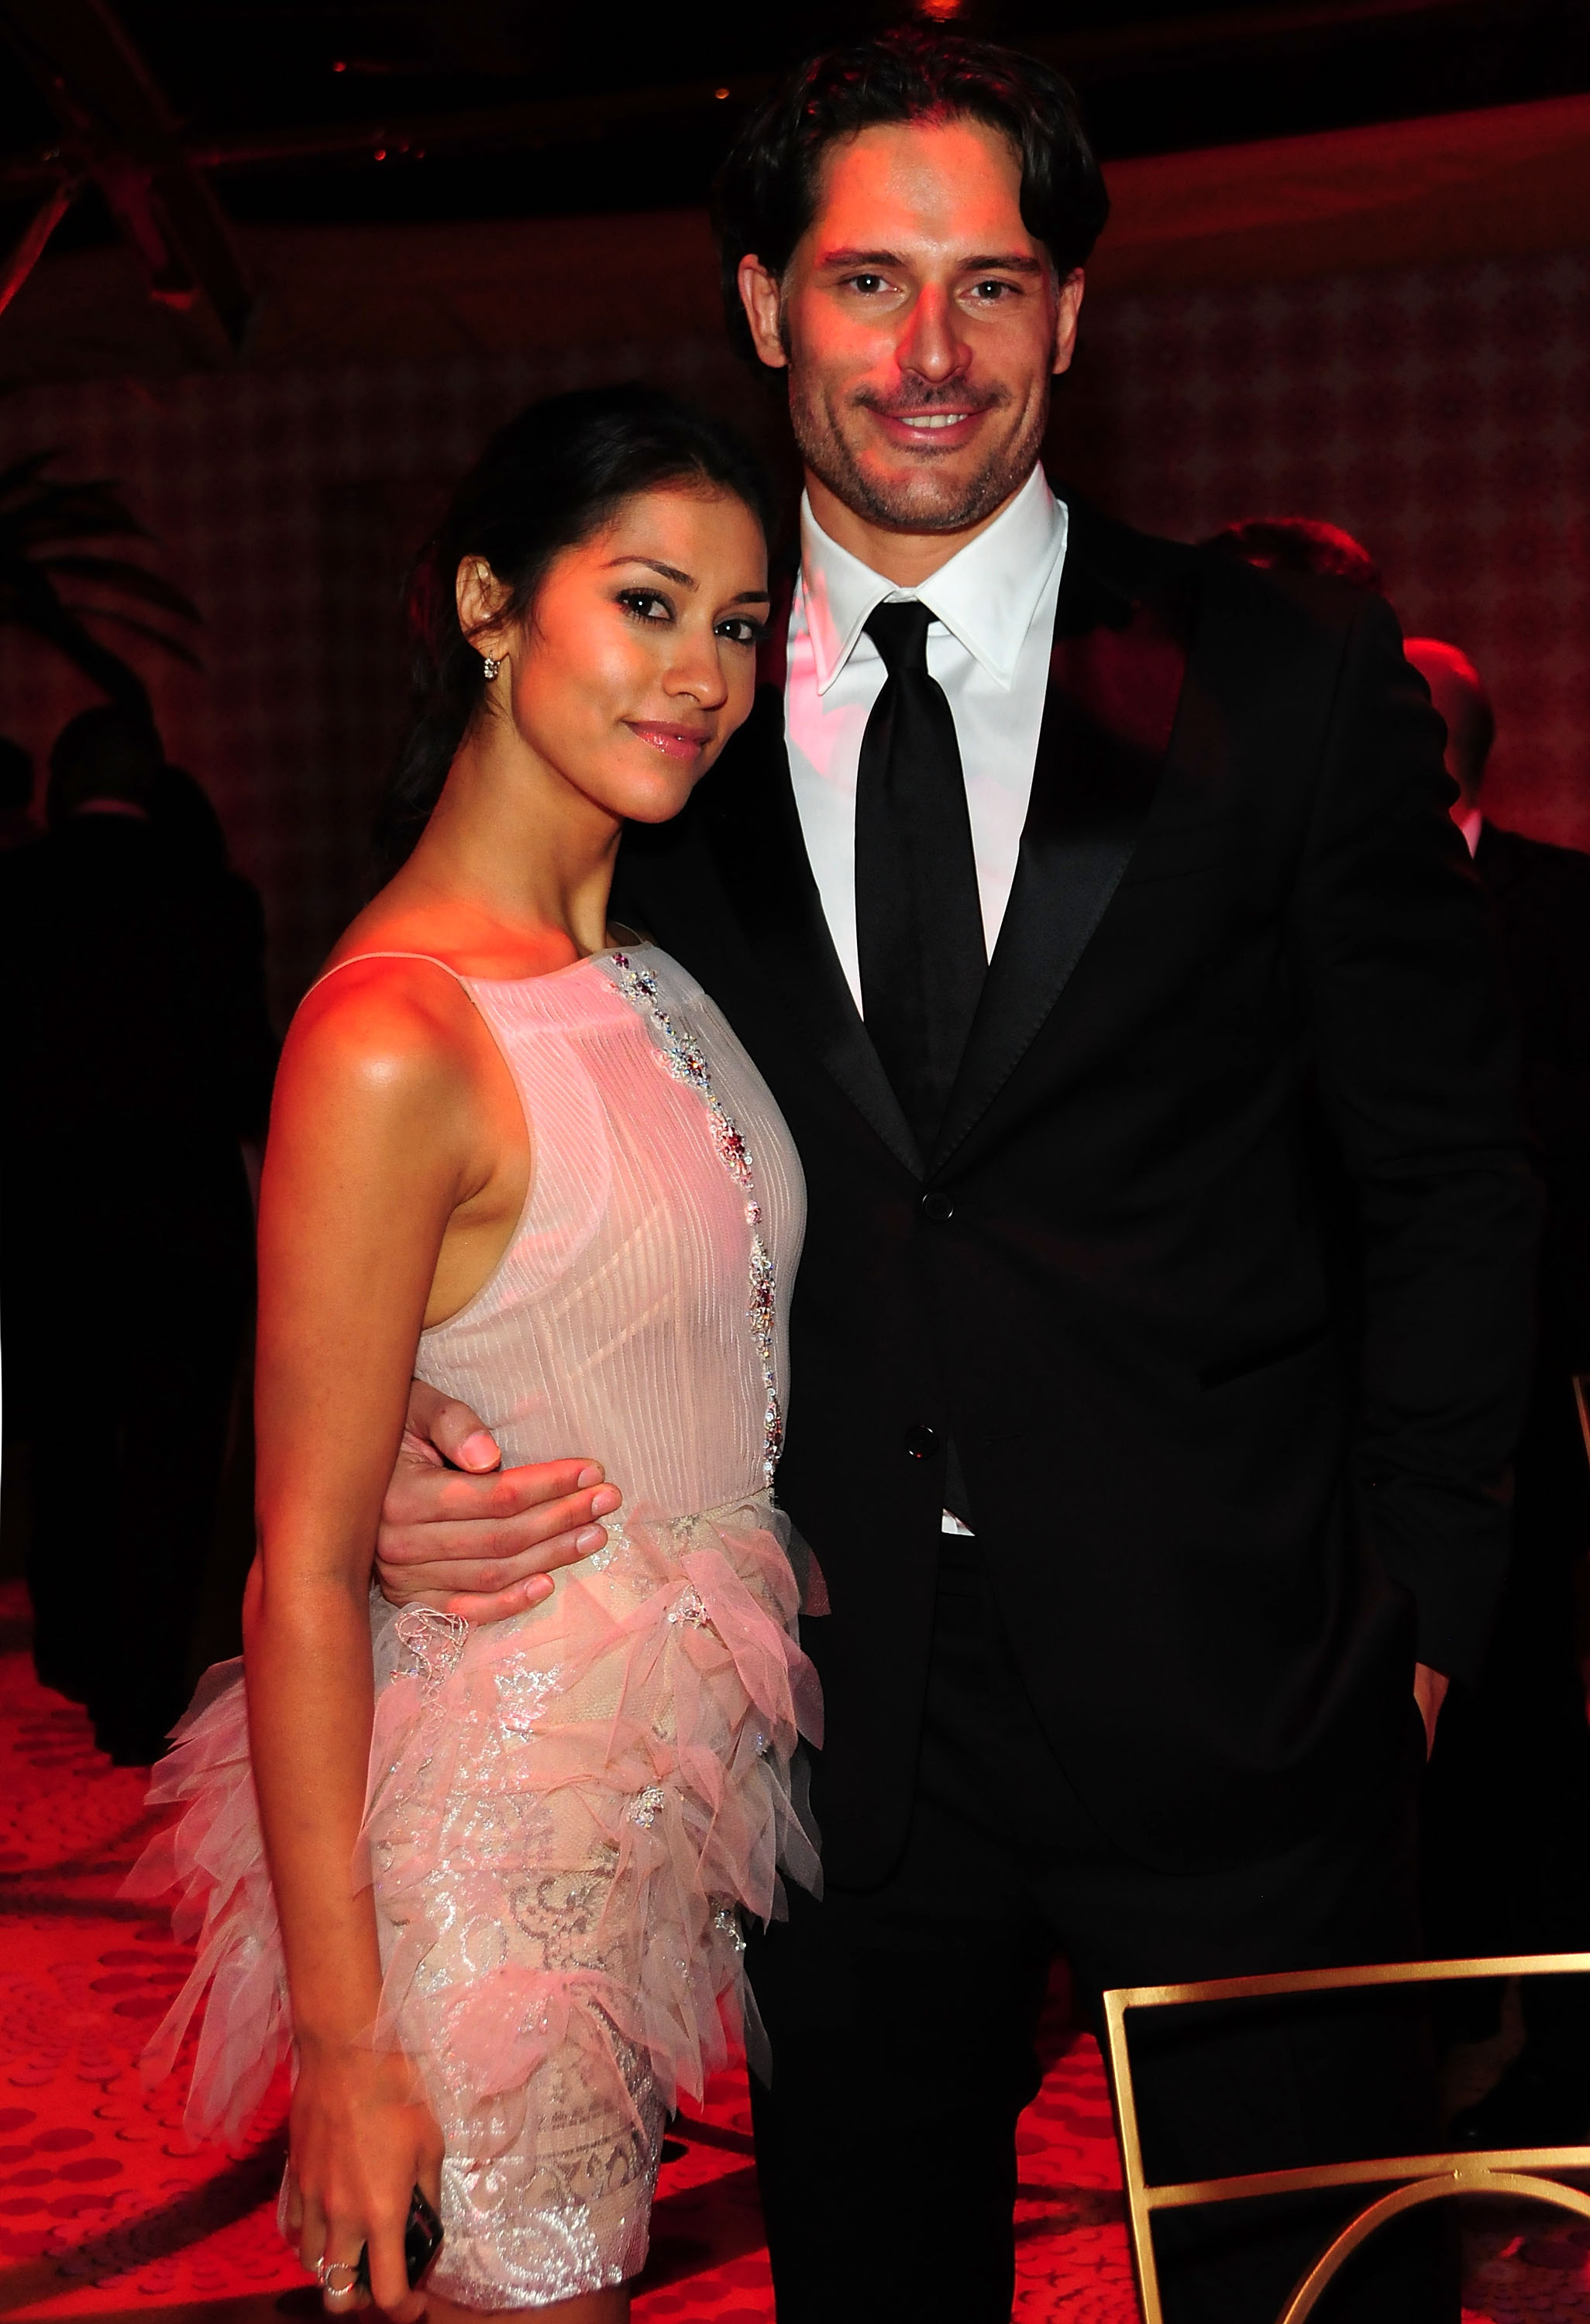 LOS ANGELES, CA - SEPTEMBER 18: Actress Janina Gavankar and actor Joe Manganiello attend HBO's Official Emmy After Party at The Plaza at the Pacific Design Center on September 18, 2011 in Los Angeles, California. (Photo by FilmMagic/FilmMagic)